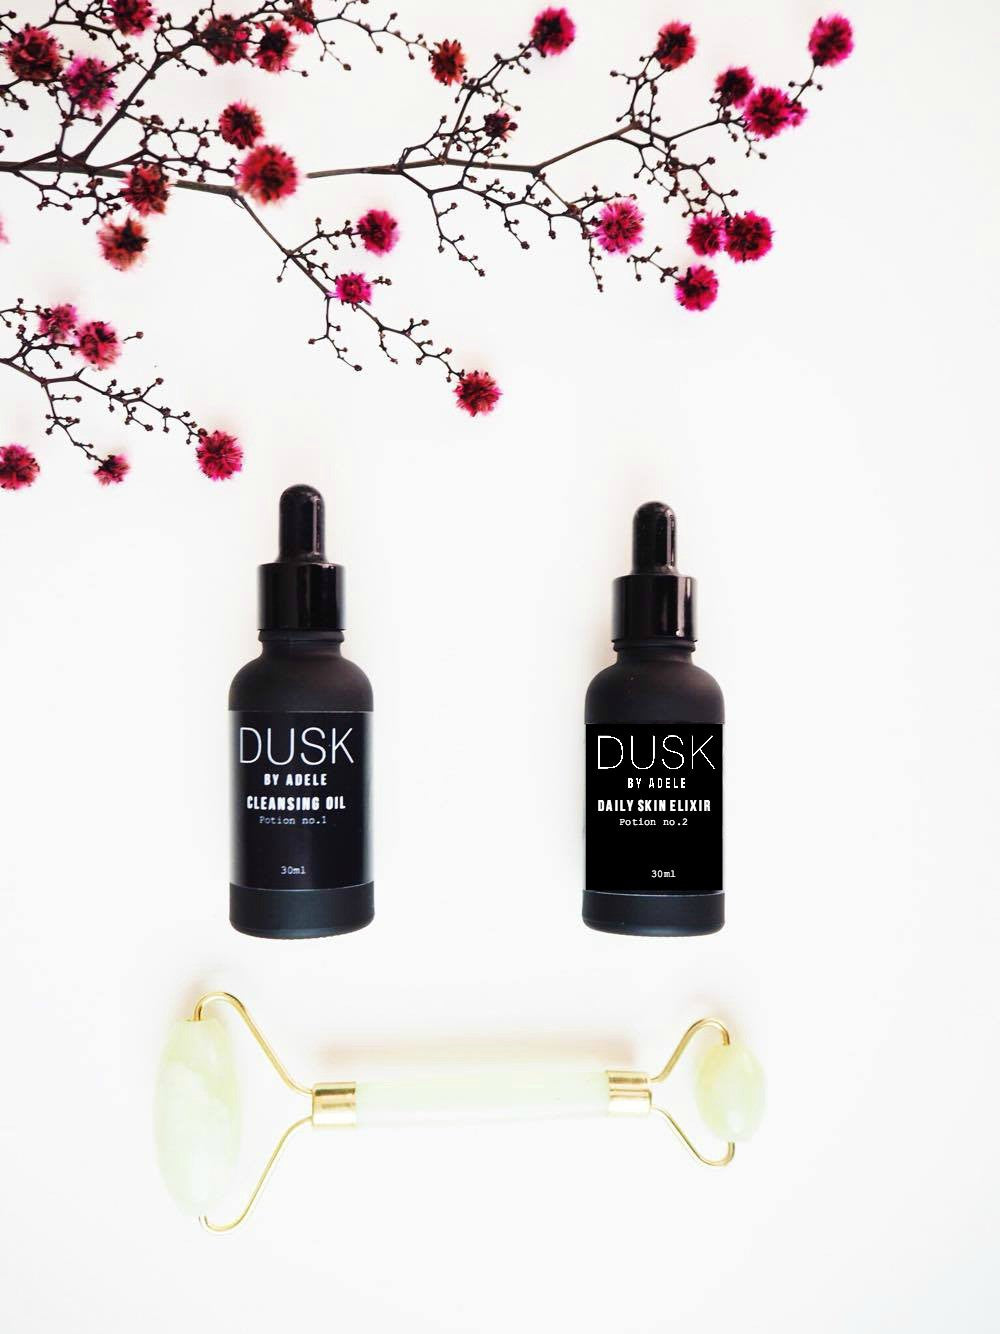 Dusk by Adele Skincare has arrived - organic, vegan, cruelty and palm oil free!